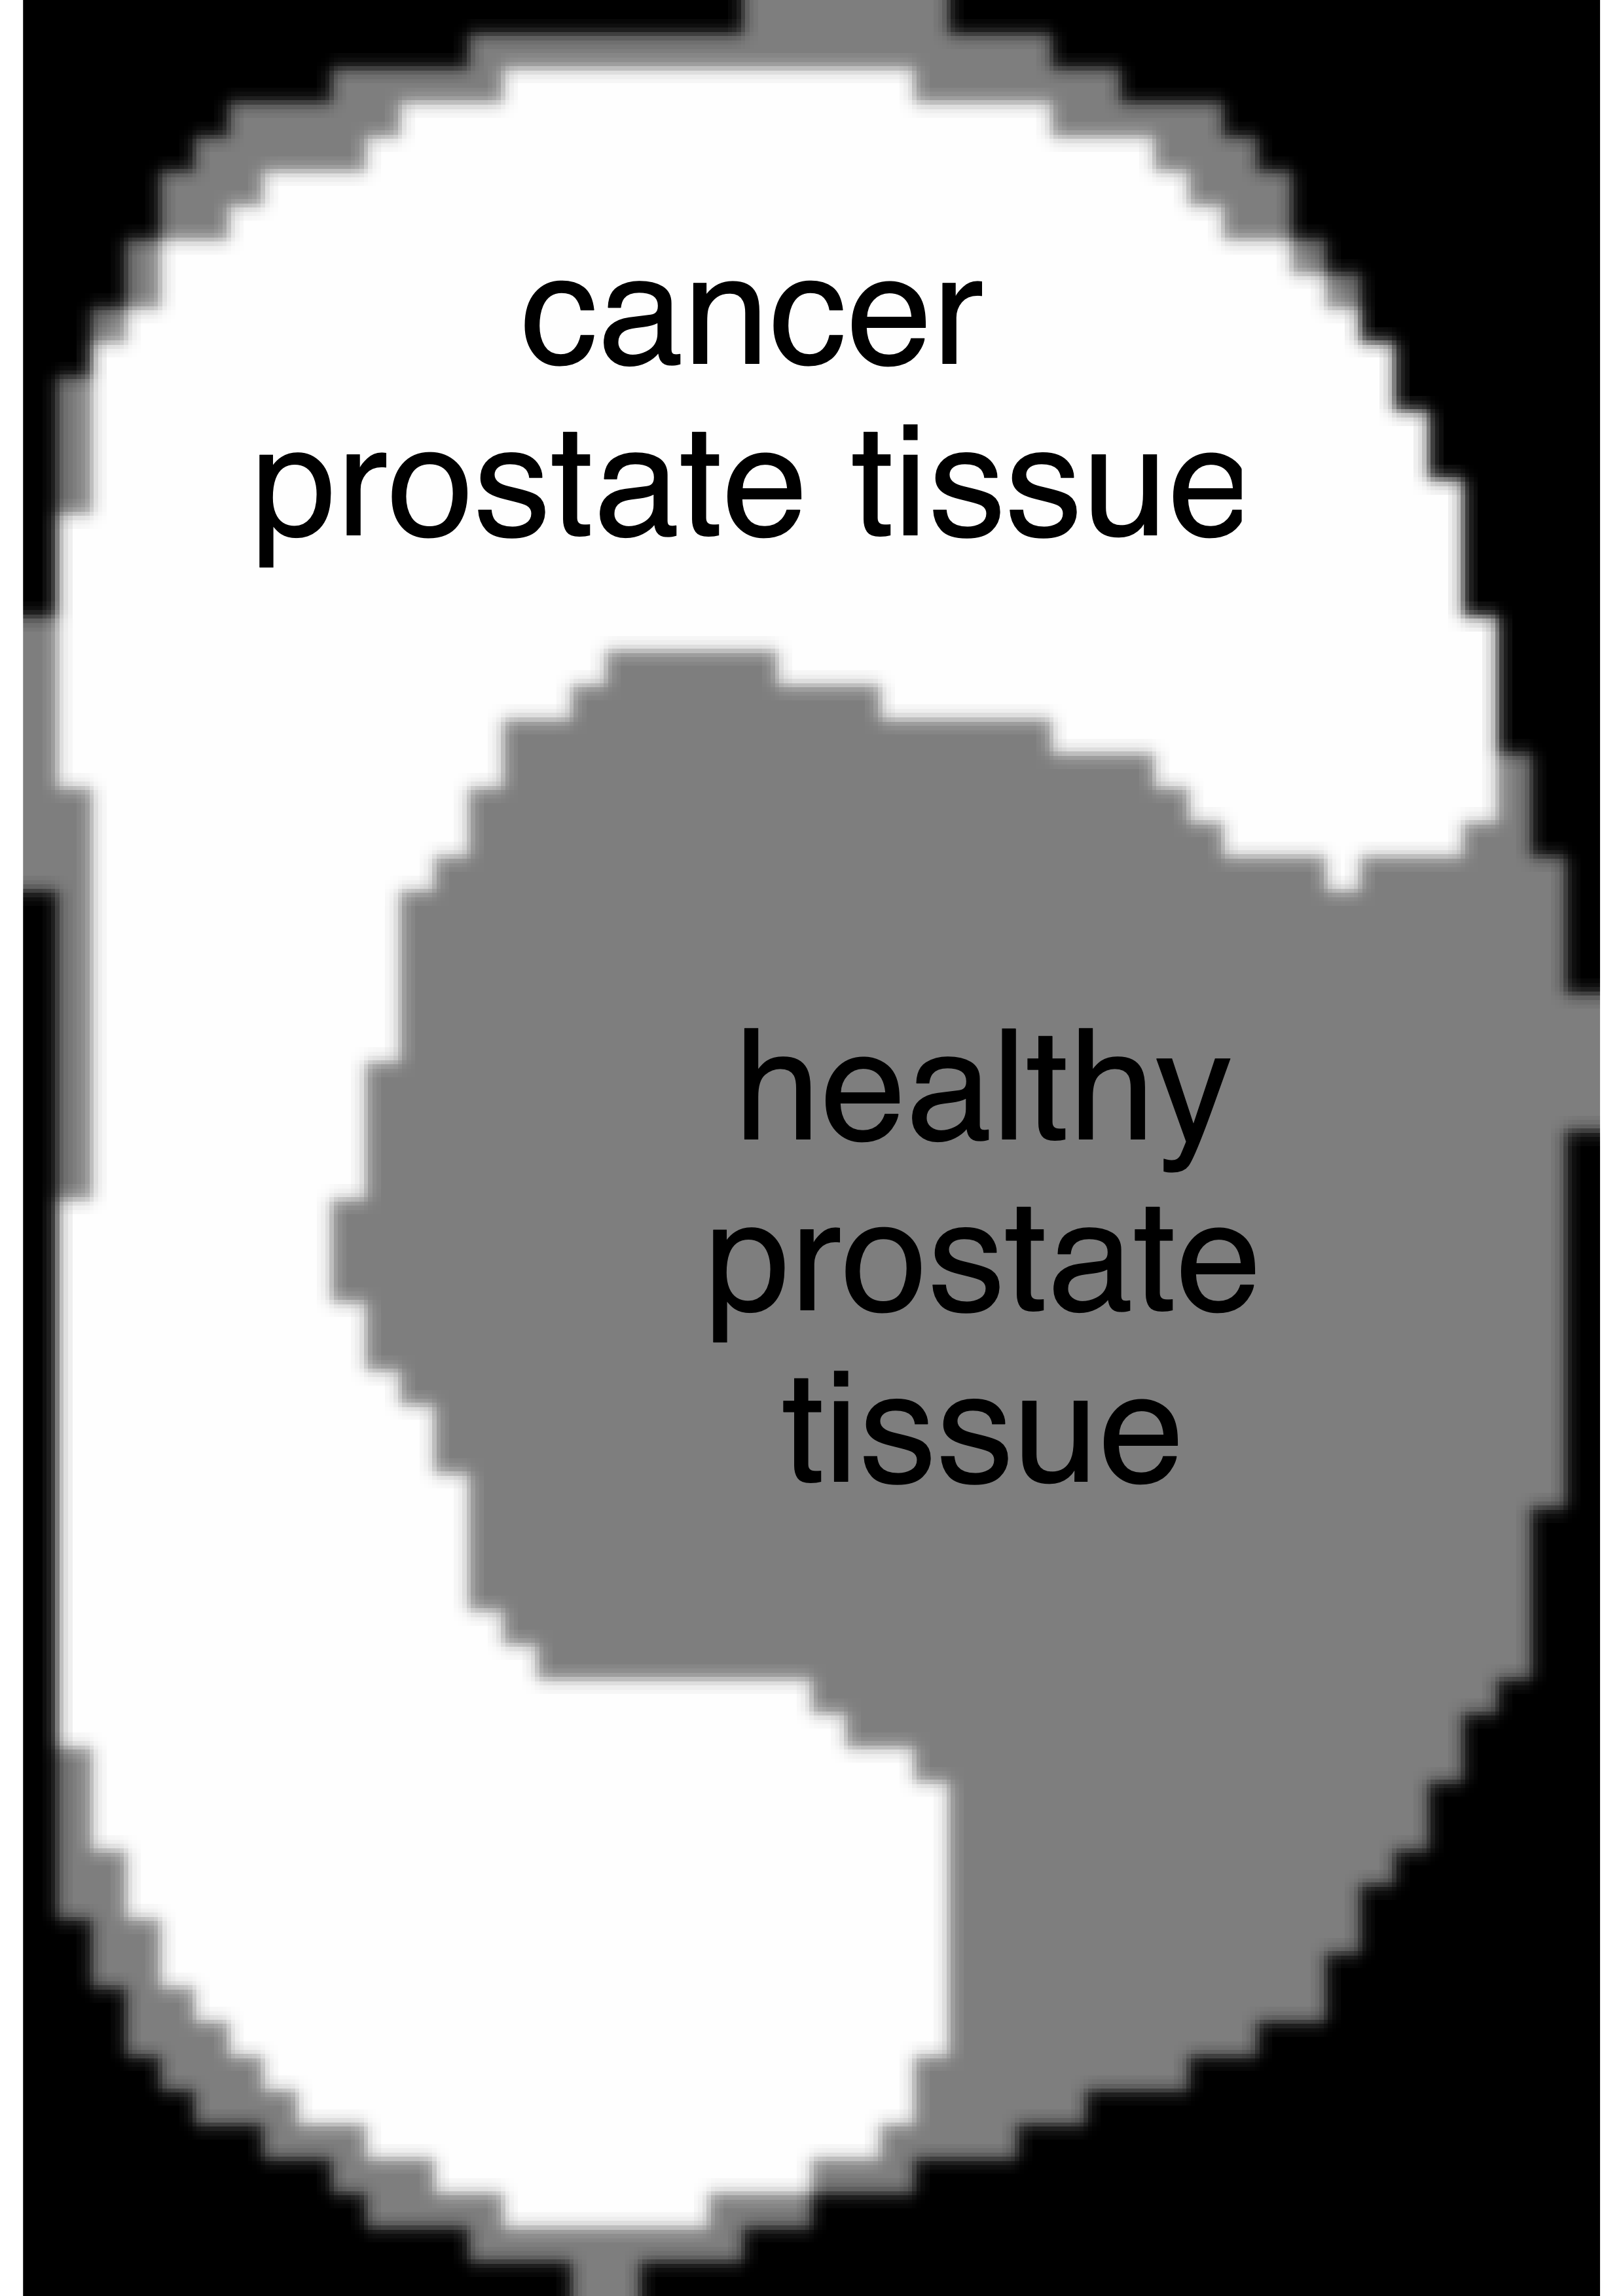 example slice of prostate scan